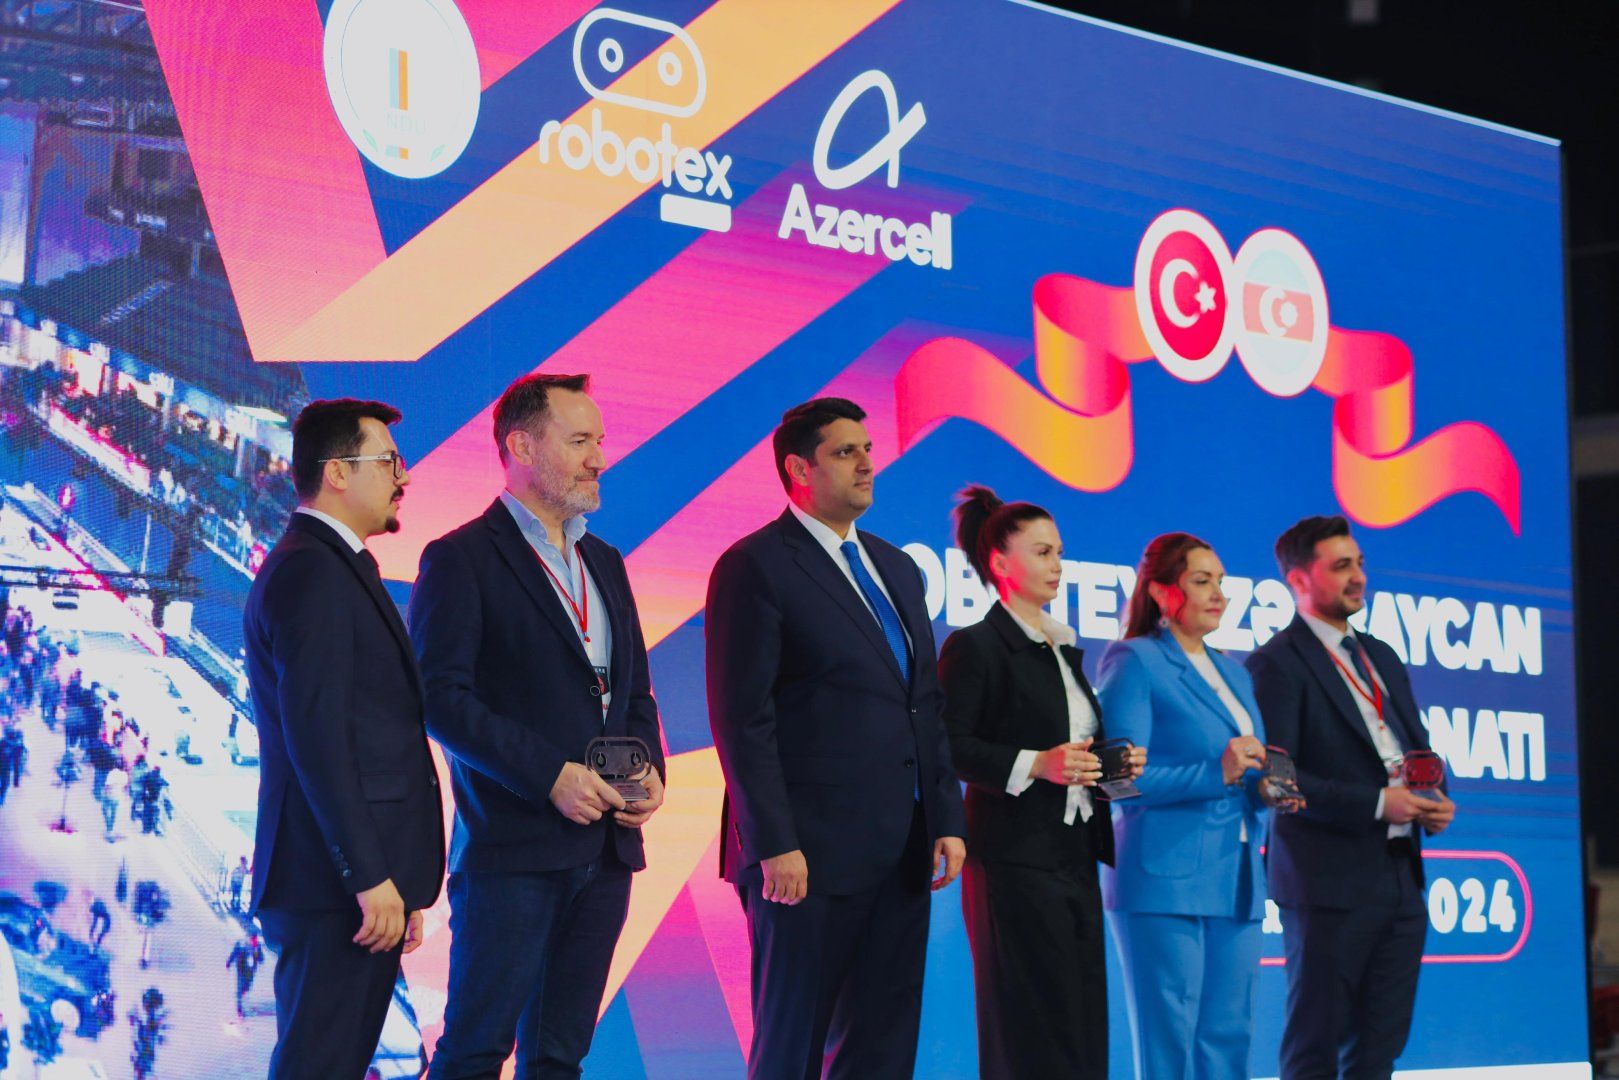 Regional competitions of Robotex Turkiye kick off with the support of Azercell! [PHOTOS]